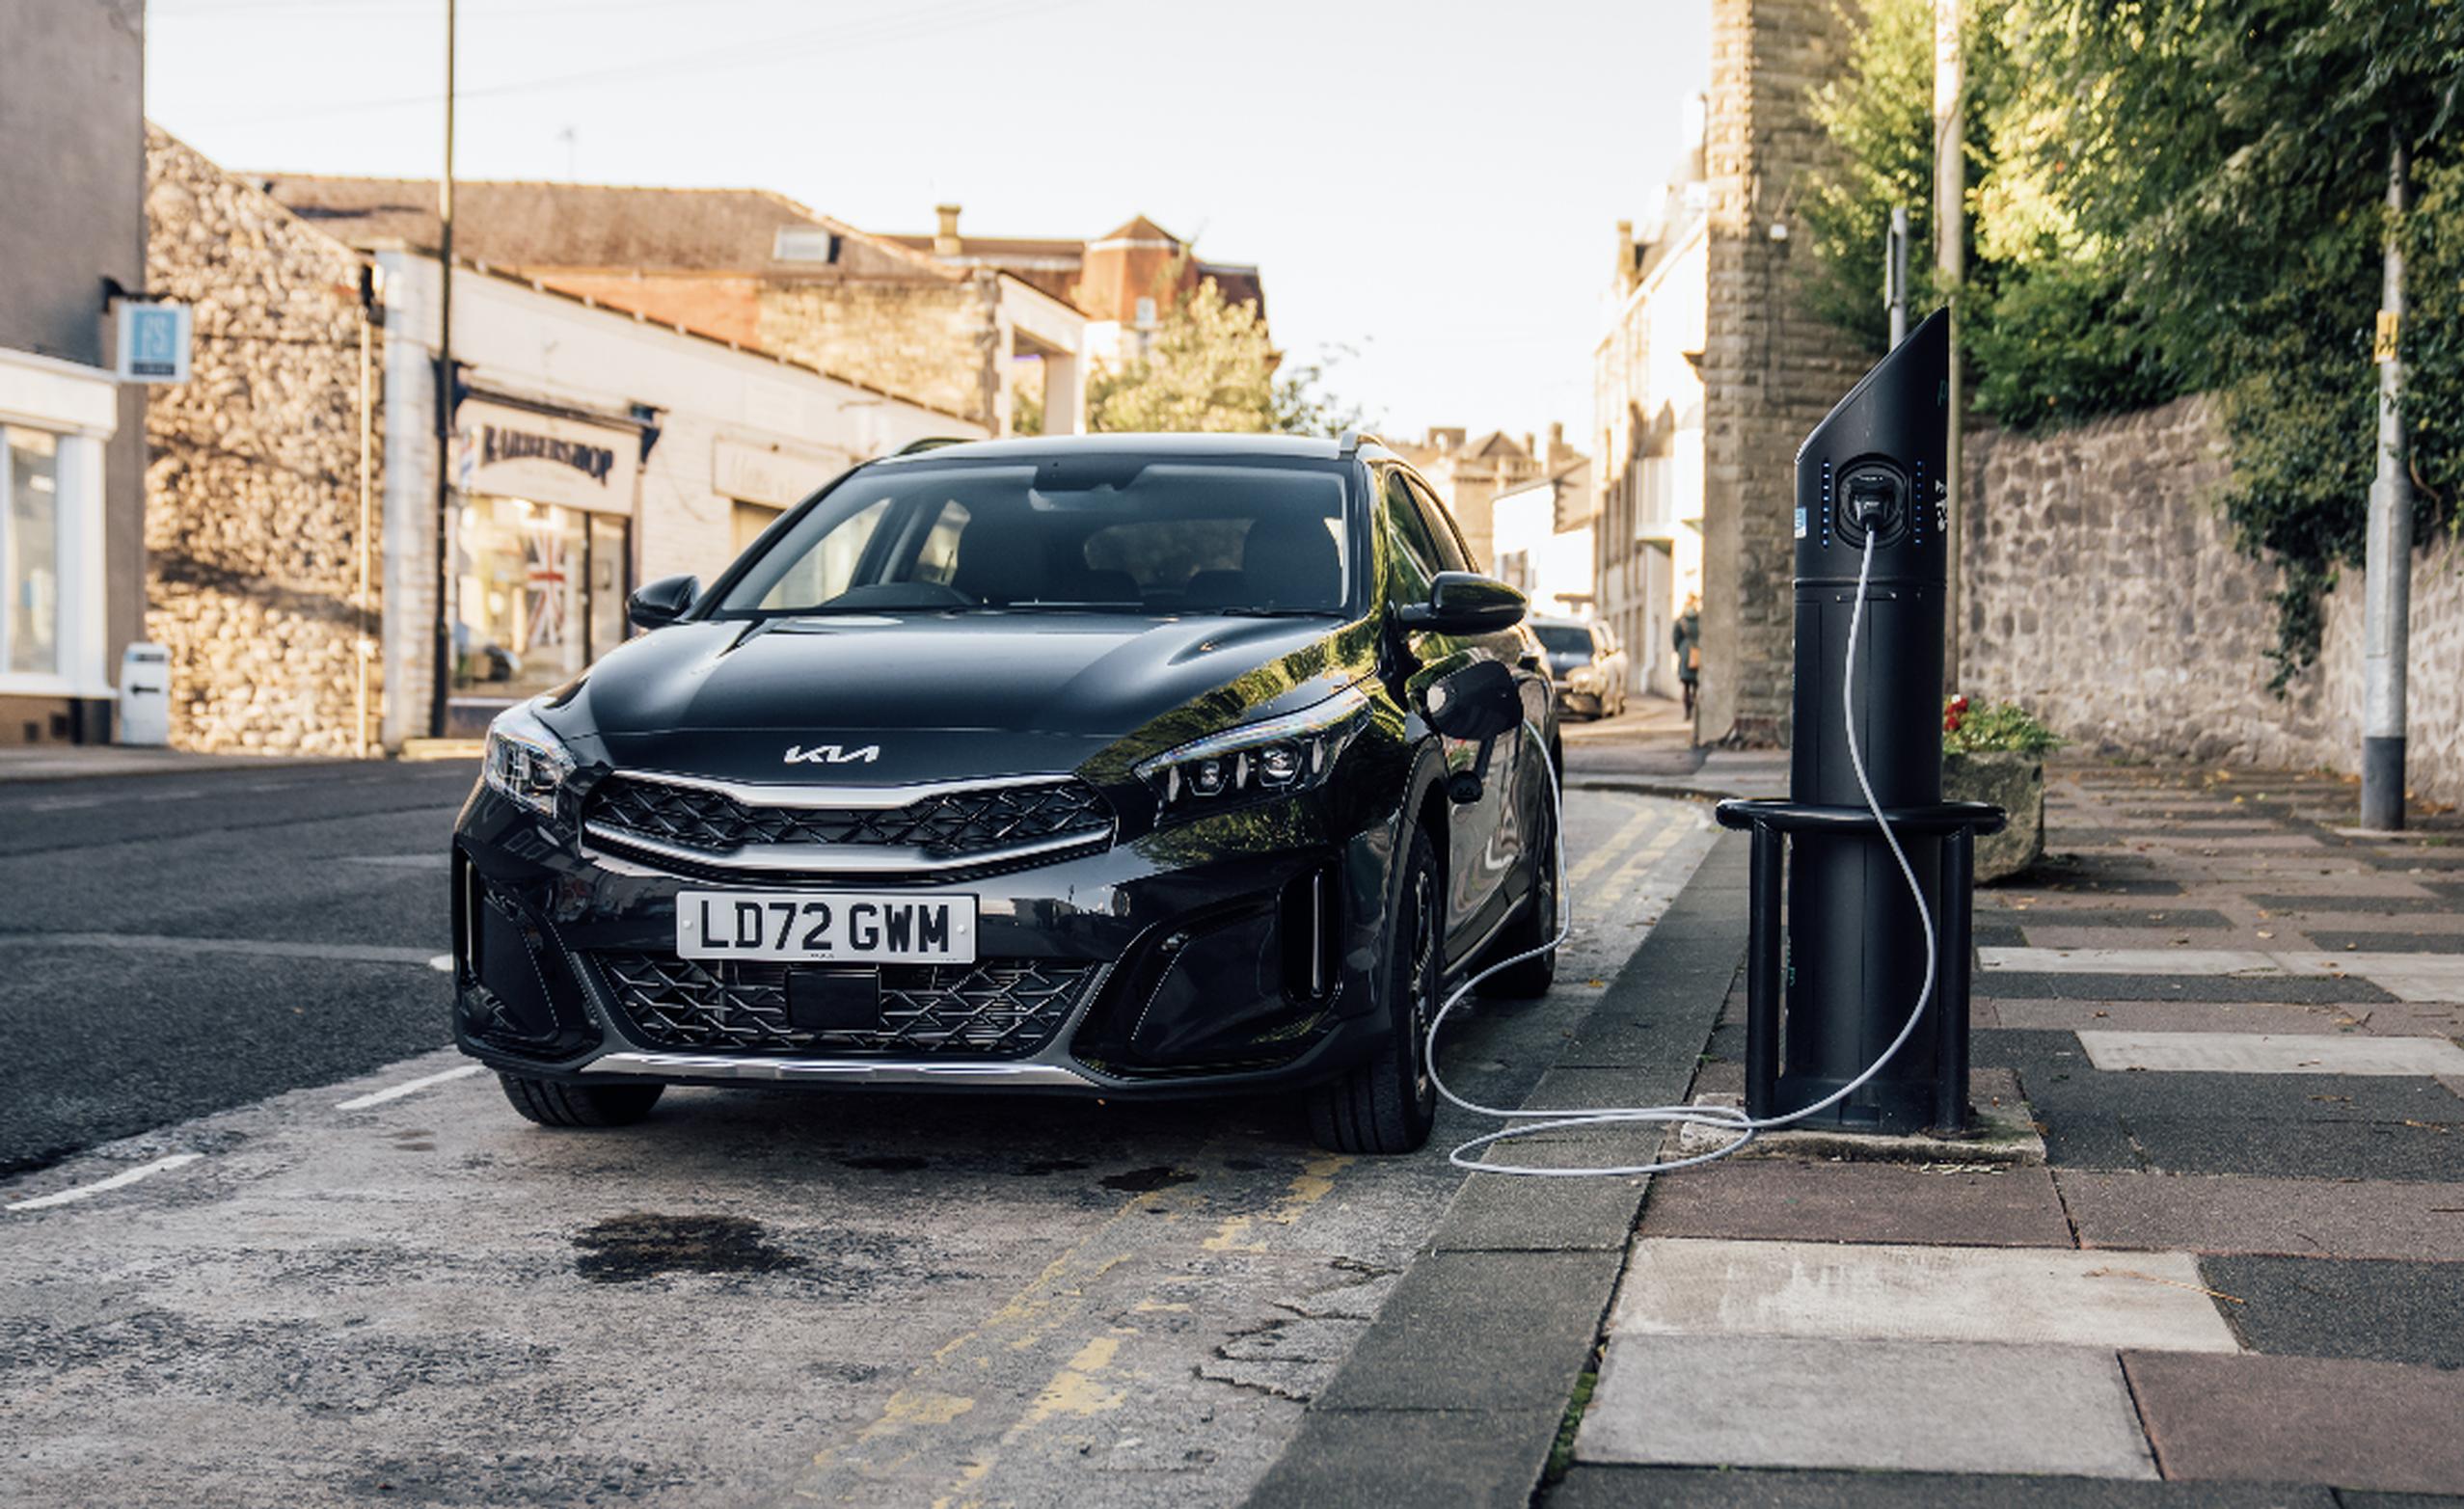 Kia Charge offers access to 30,000 EV chargers across UK